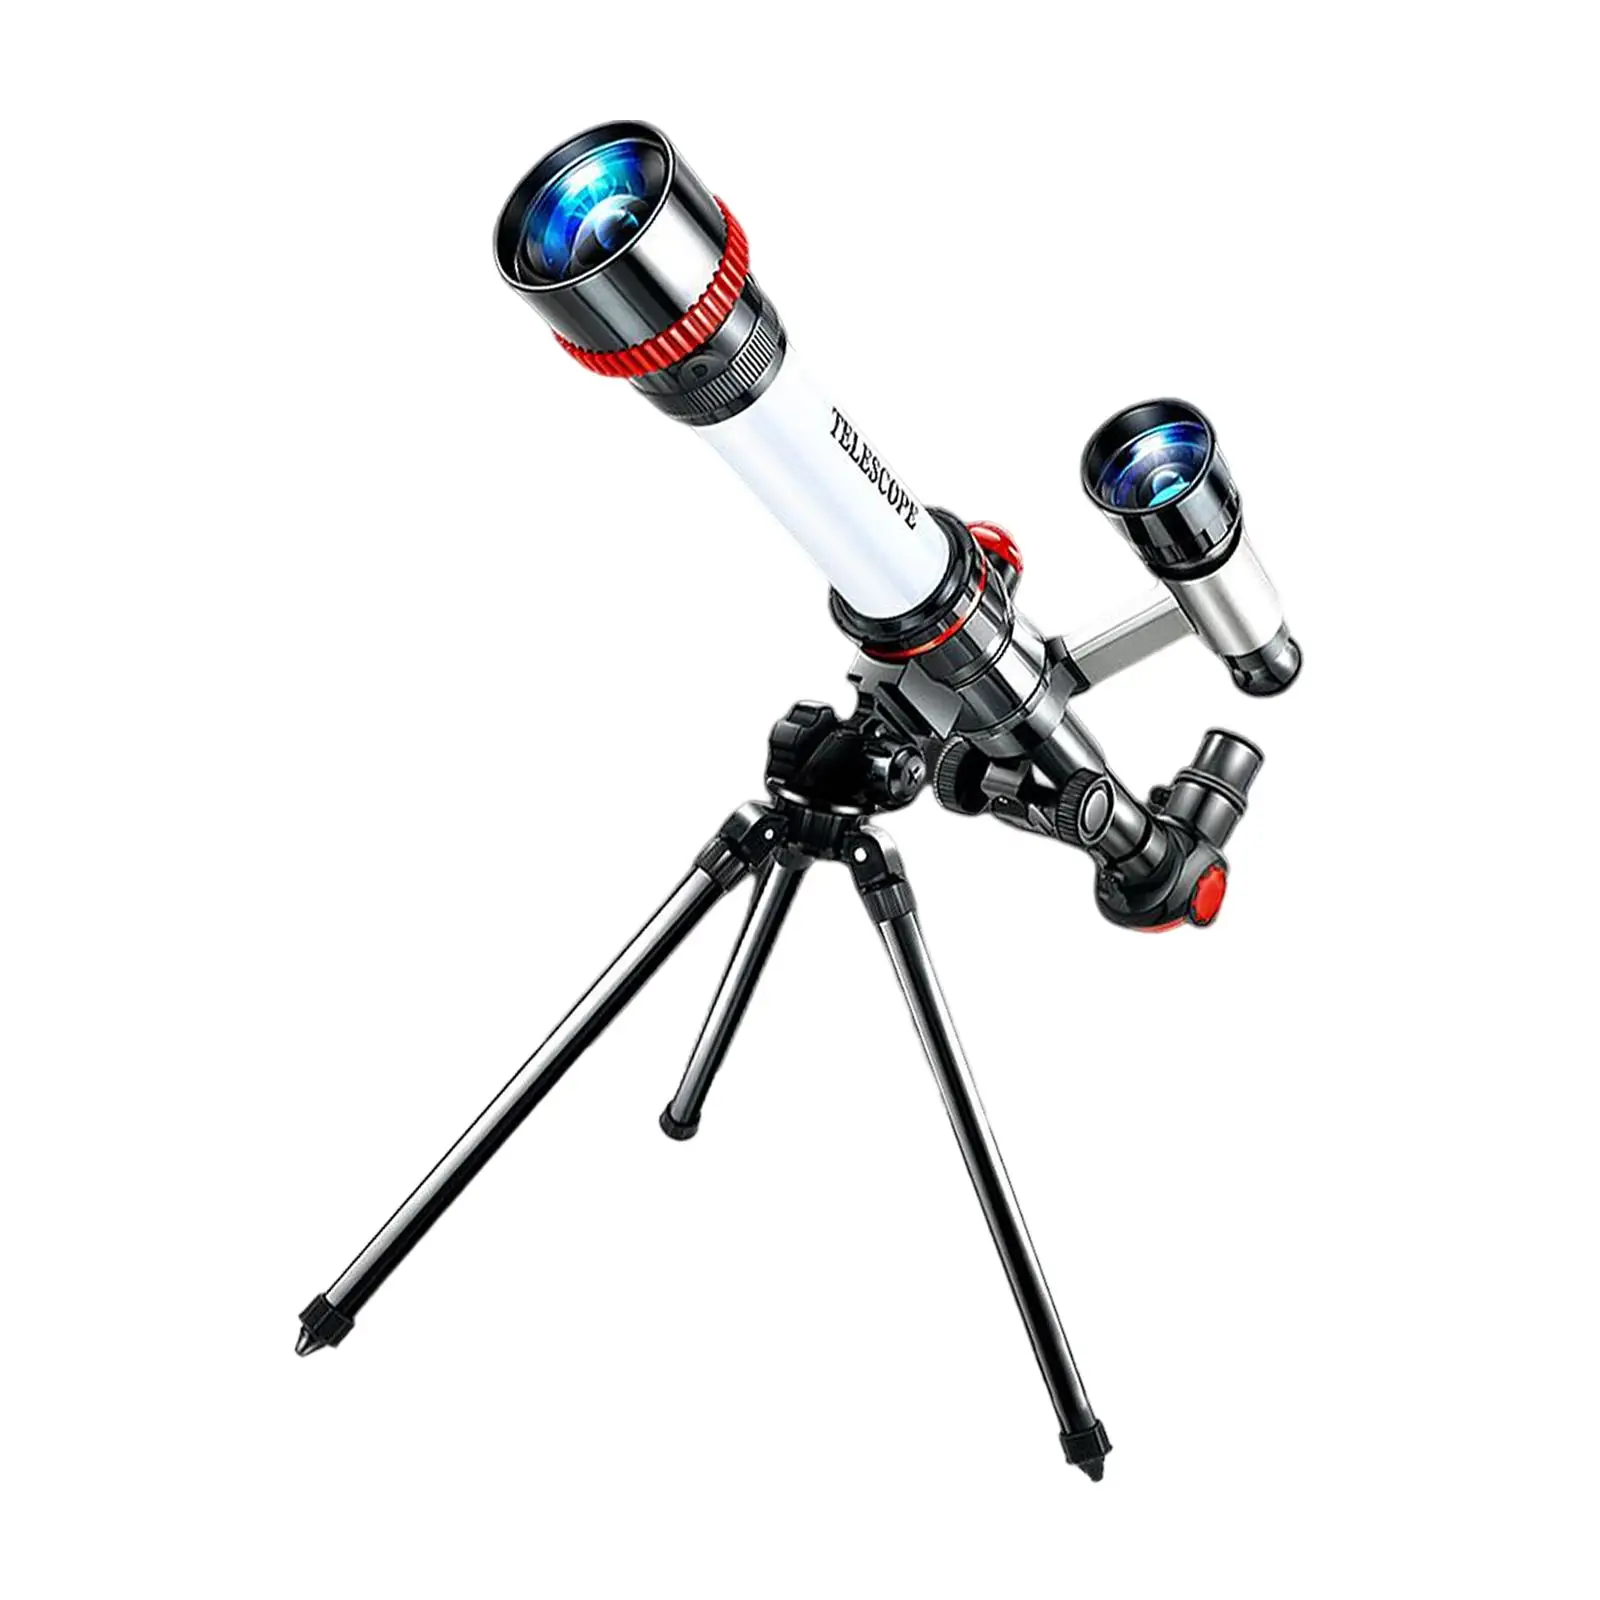 60mm Caliber Telescope with Finder Scope for Beginners Accessory ,to Observe Celestial Objects AT Night